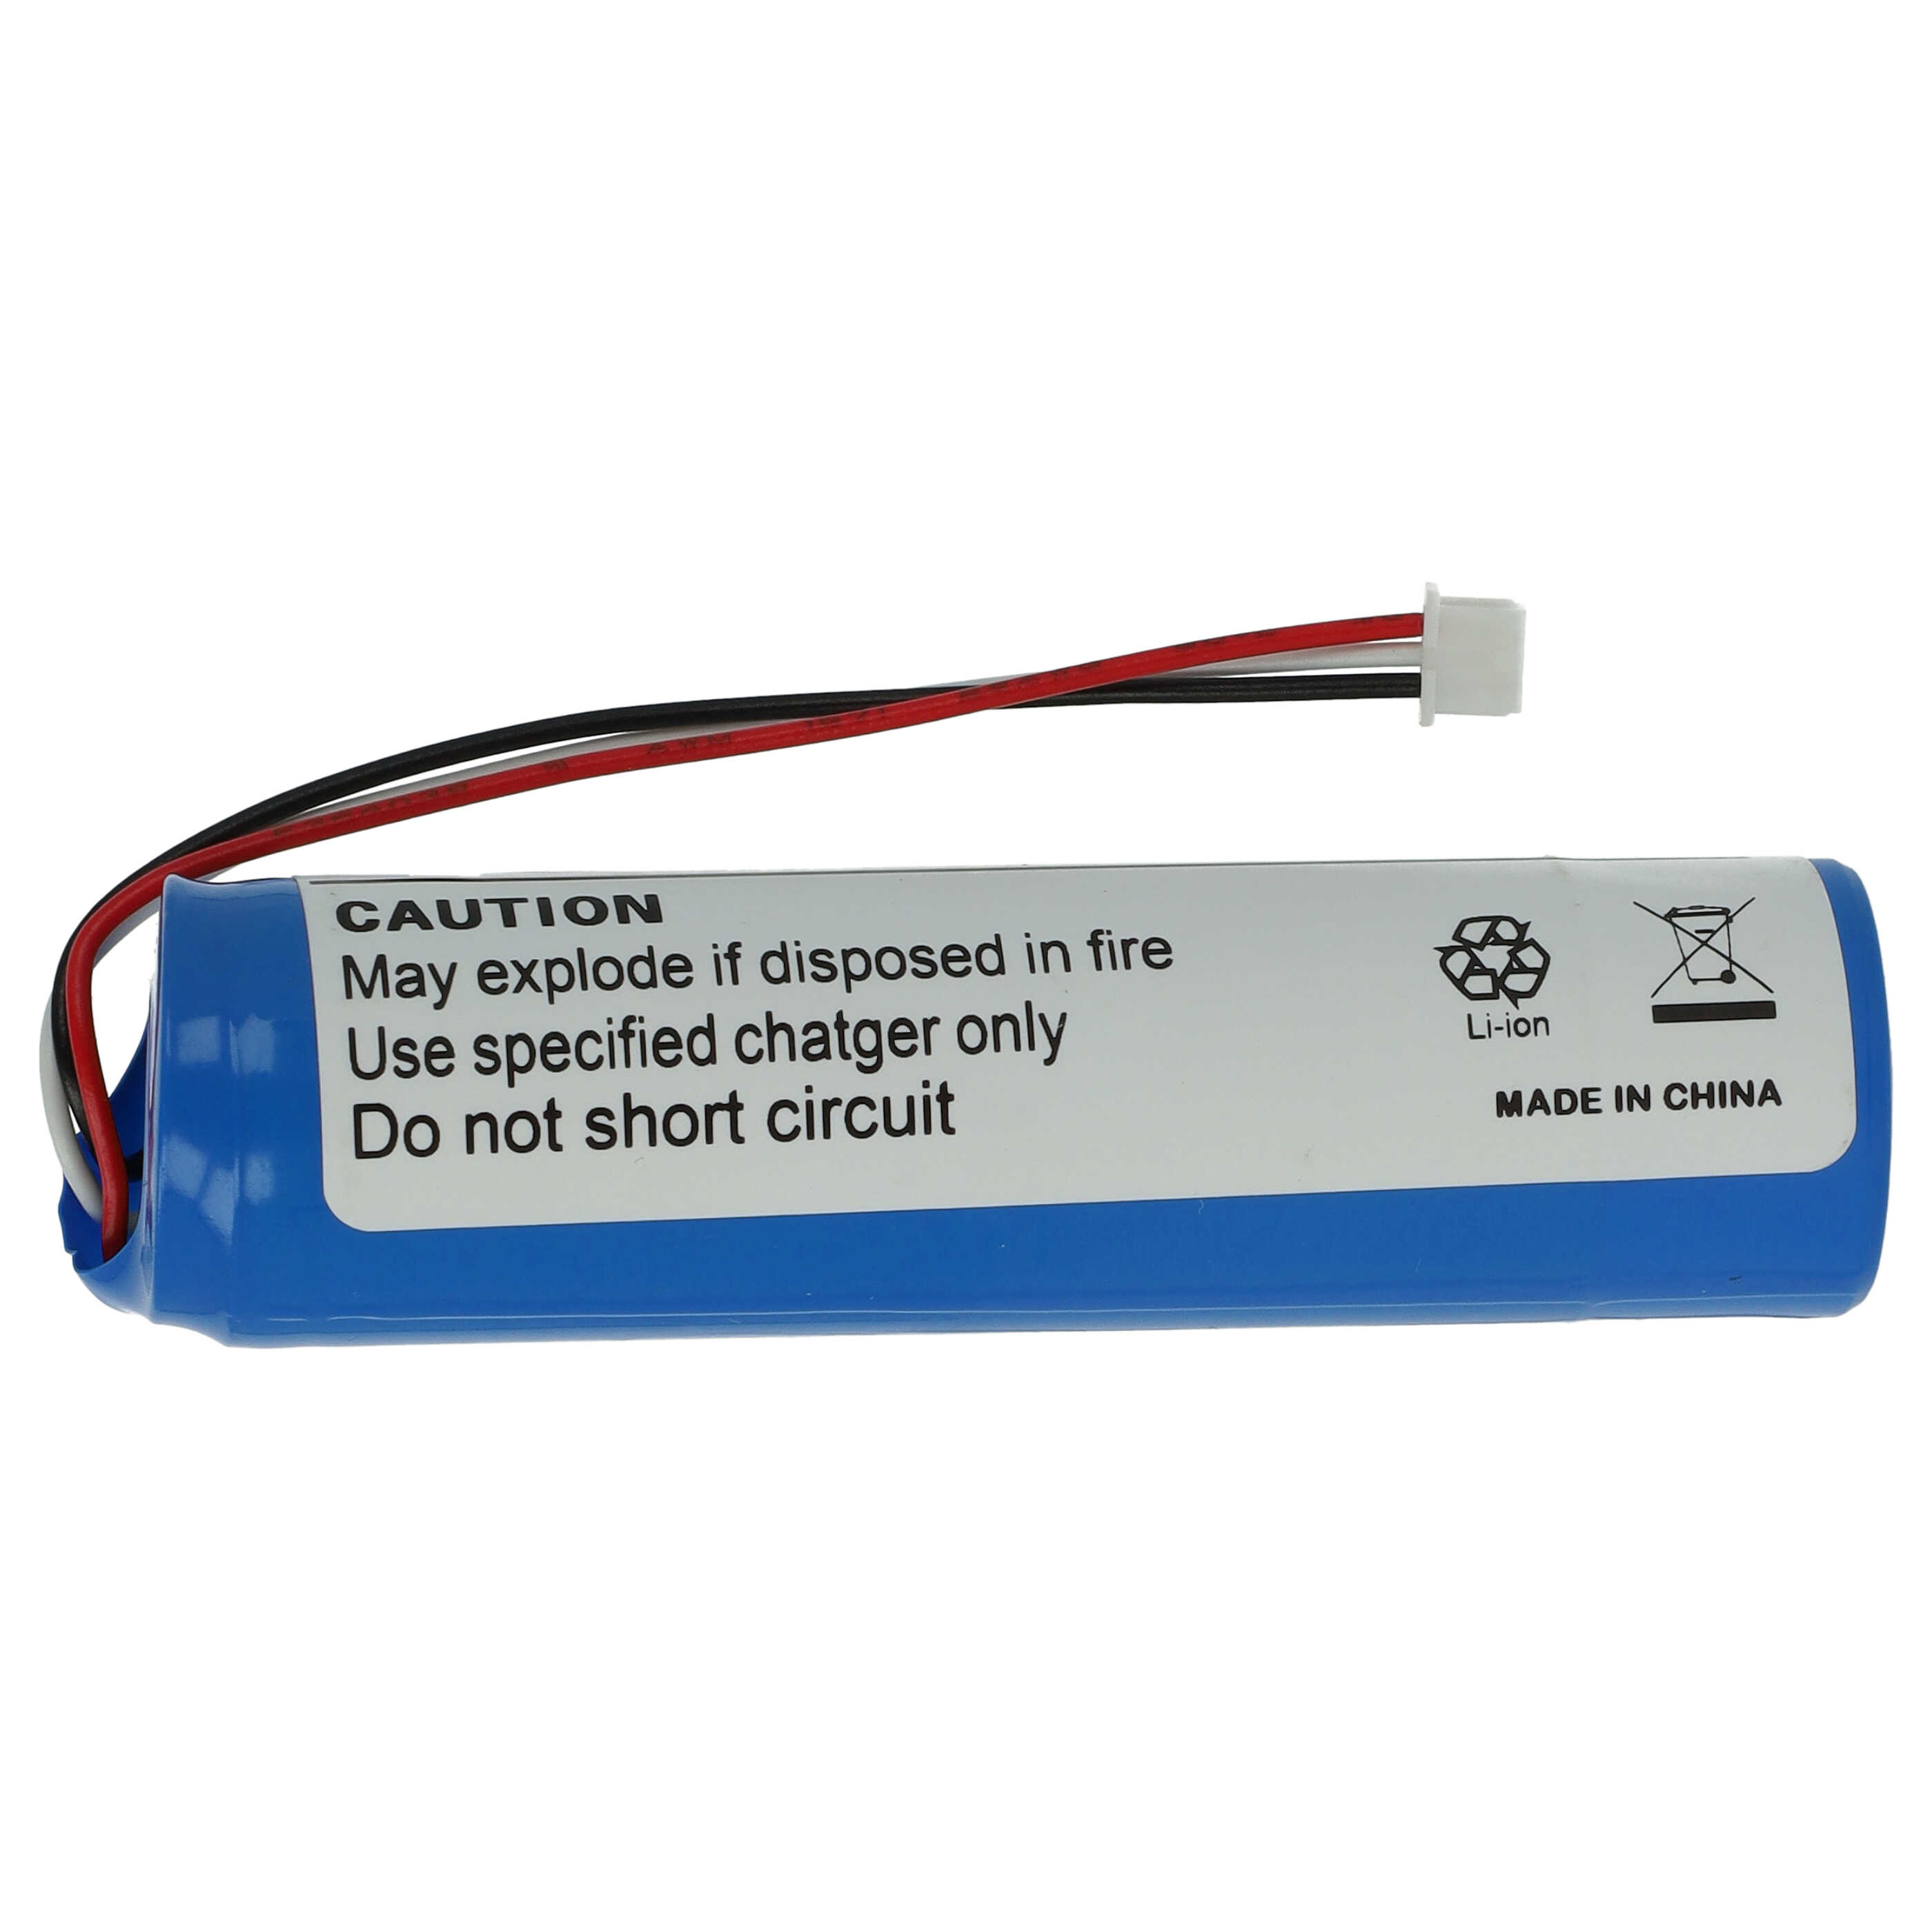 GPS Battery Replacement for TomTom MALAGA, 6027A0131301, 6027A0050901, L5 - 2600mAh, 3.7V